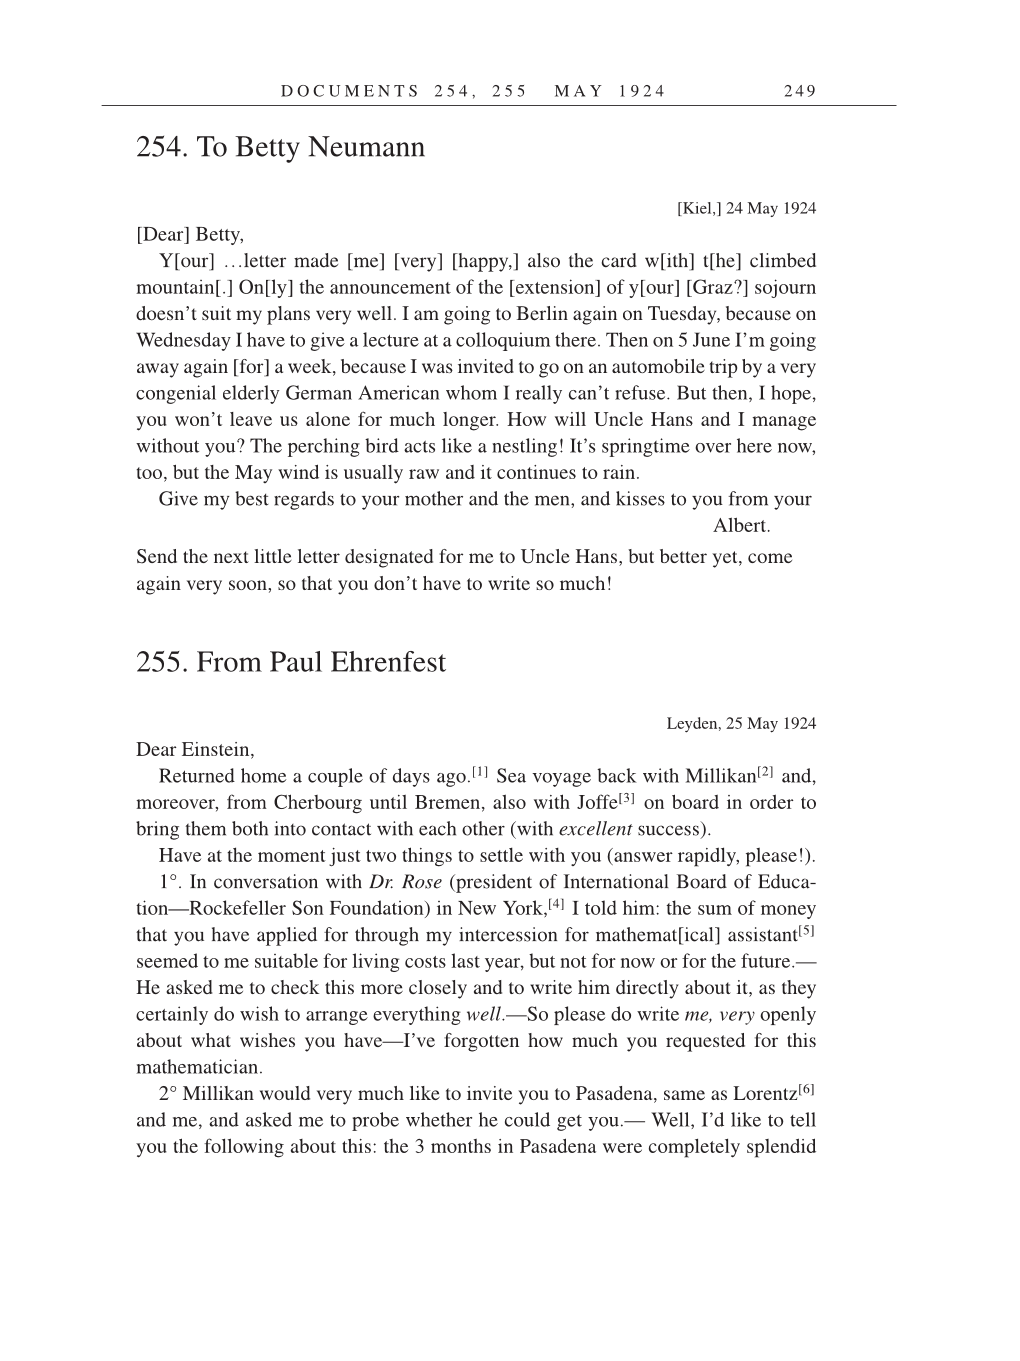 Volume 14: The Berlin Years: Writings & Correspondence, April 1923-May 1925 (English Translation Supplement) page 249